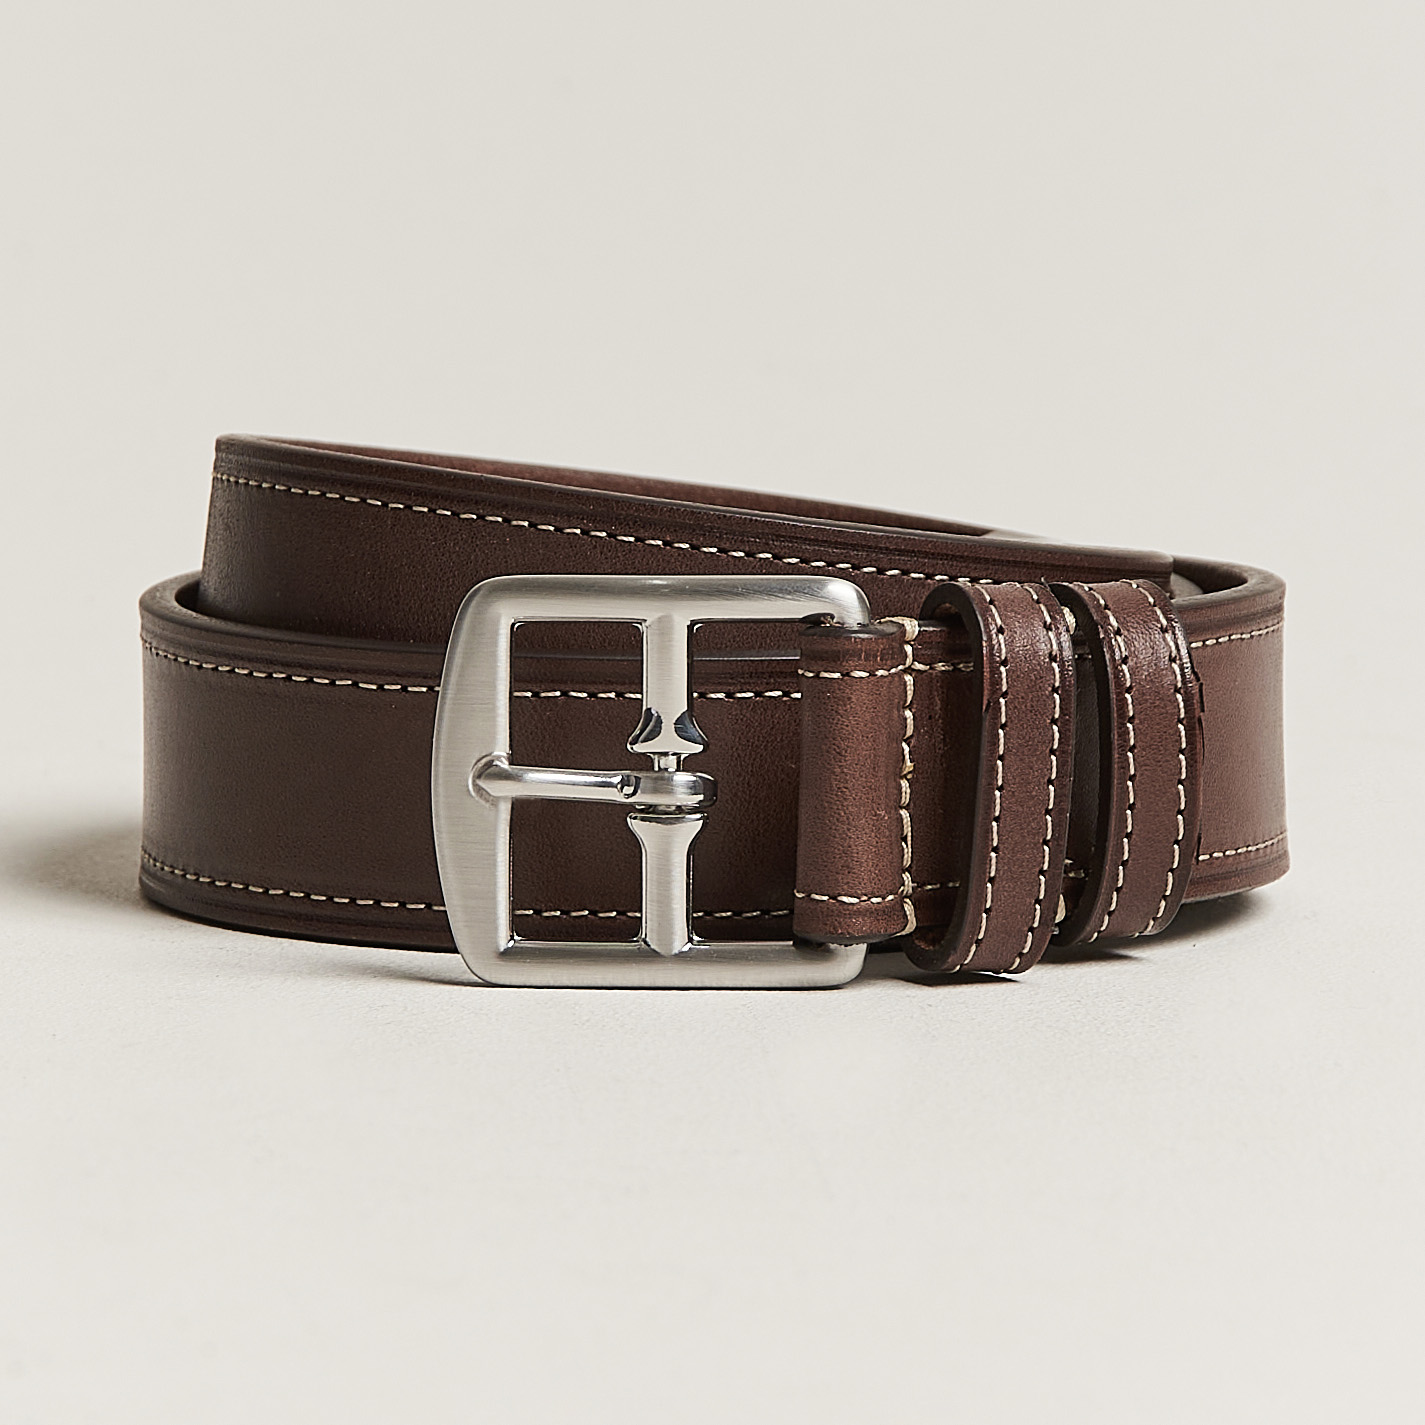 Anderson's Bridle Stiched 3,5 cm Leather Belt Brown at CareOfCarl.com